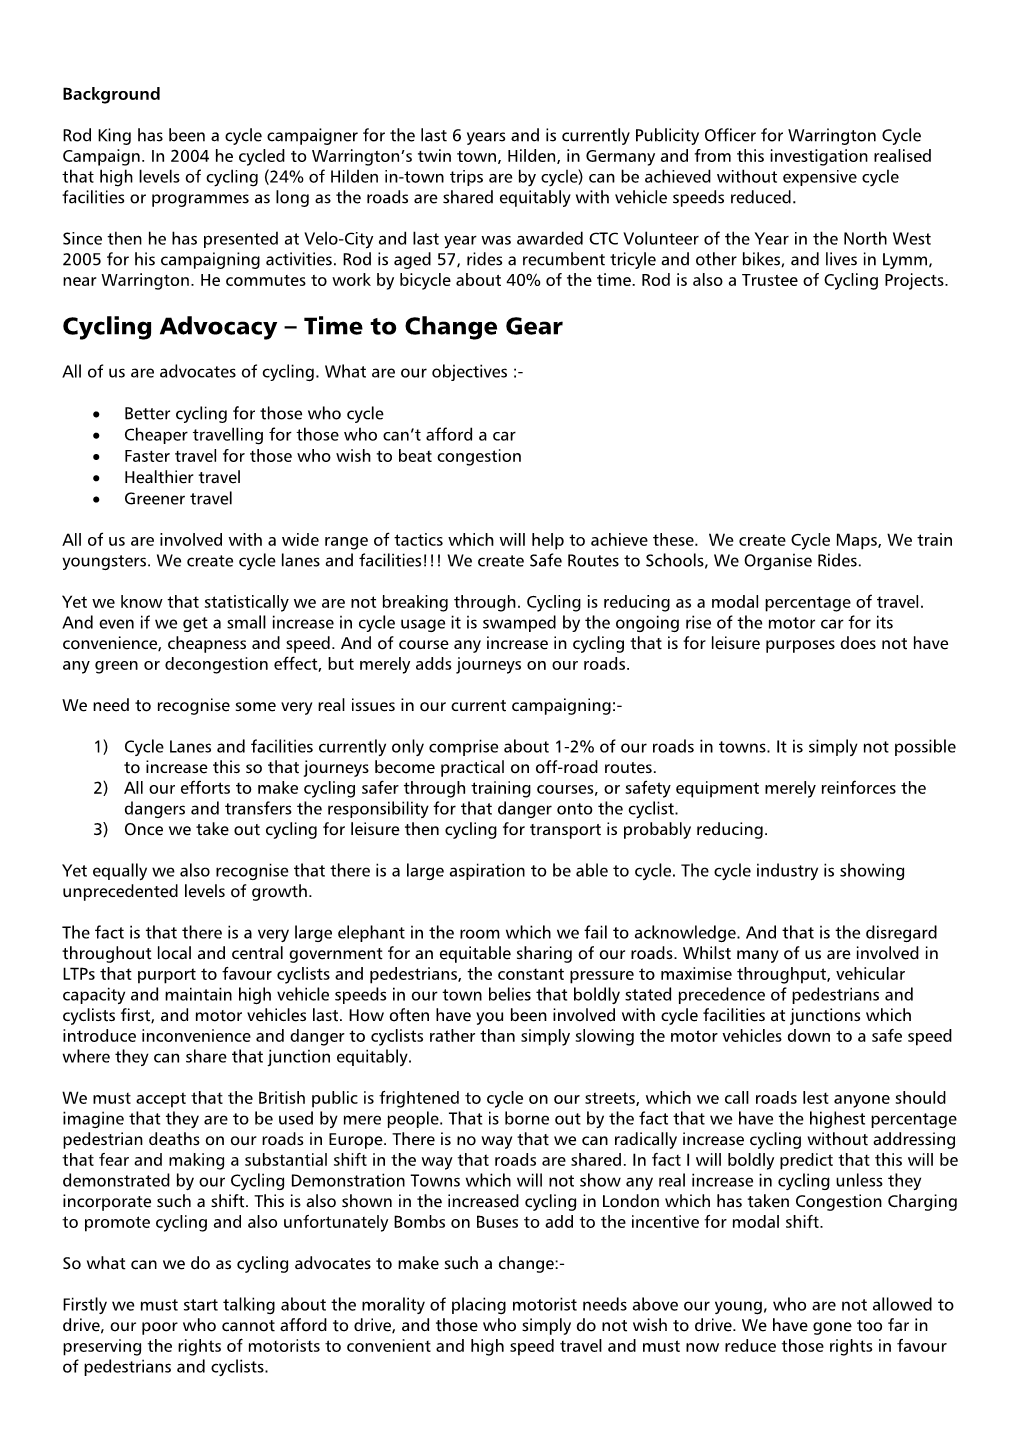 Cycling Advocacy – Time to Change Gear